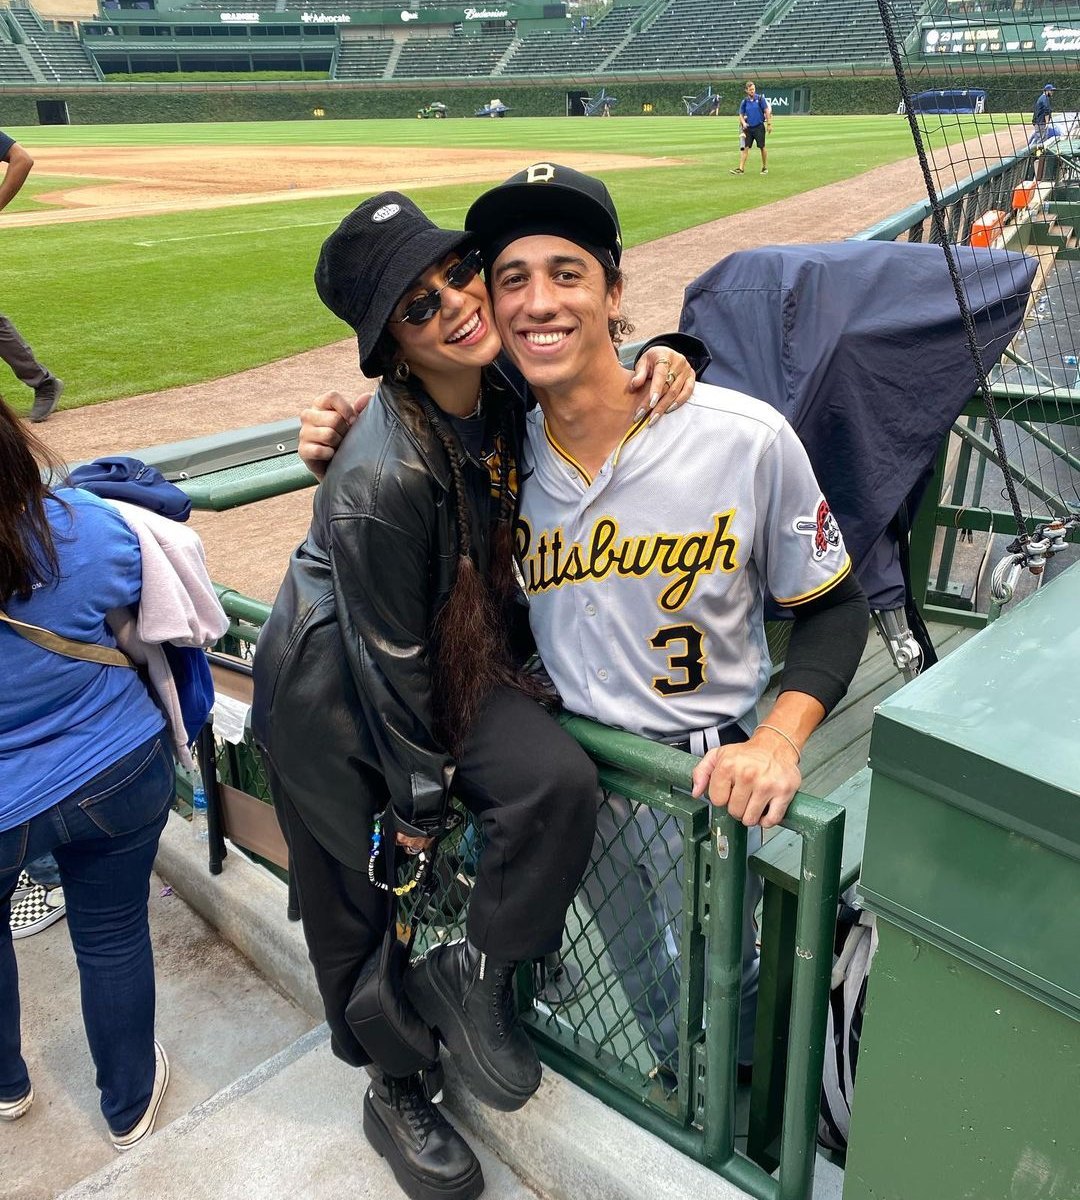 Who Is Vanessa Hudgens' Fiancé? All About MLB Player Cole Tucker